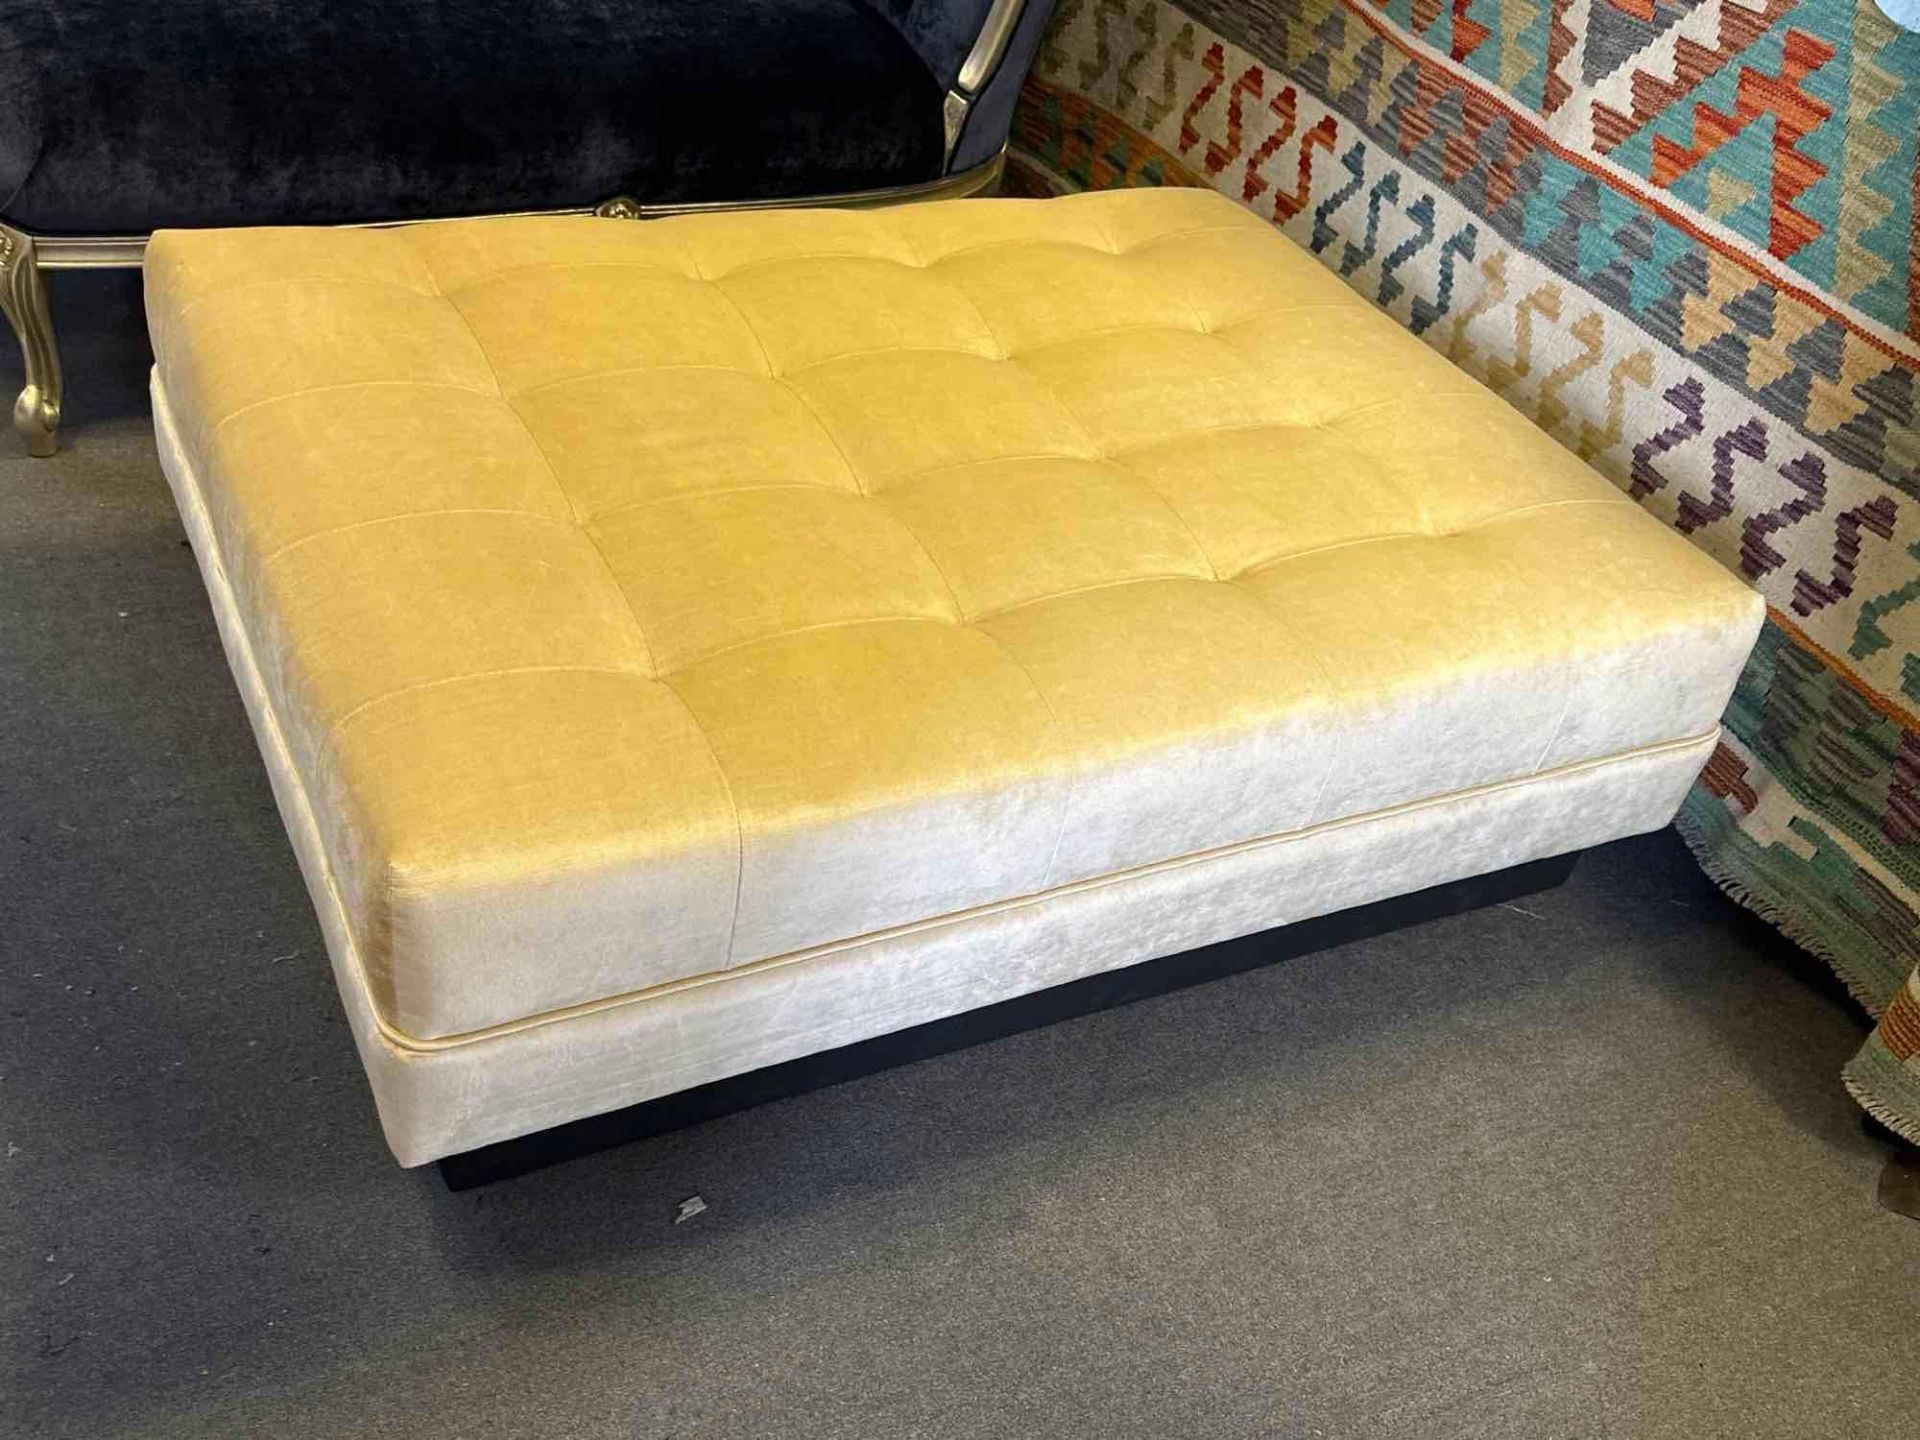 Pin Tuck Extra Large Bespoke Golden Yellow Footstool Coffee Table Ottoman Plush Upholstered - Image 6 of 6